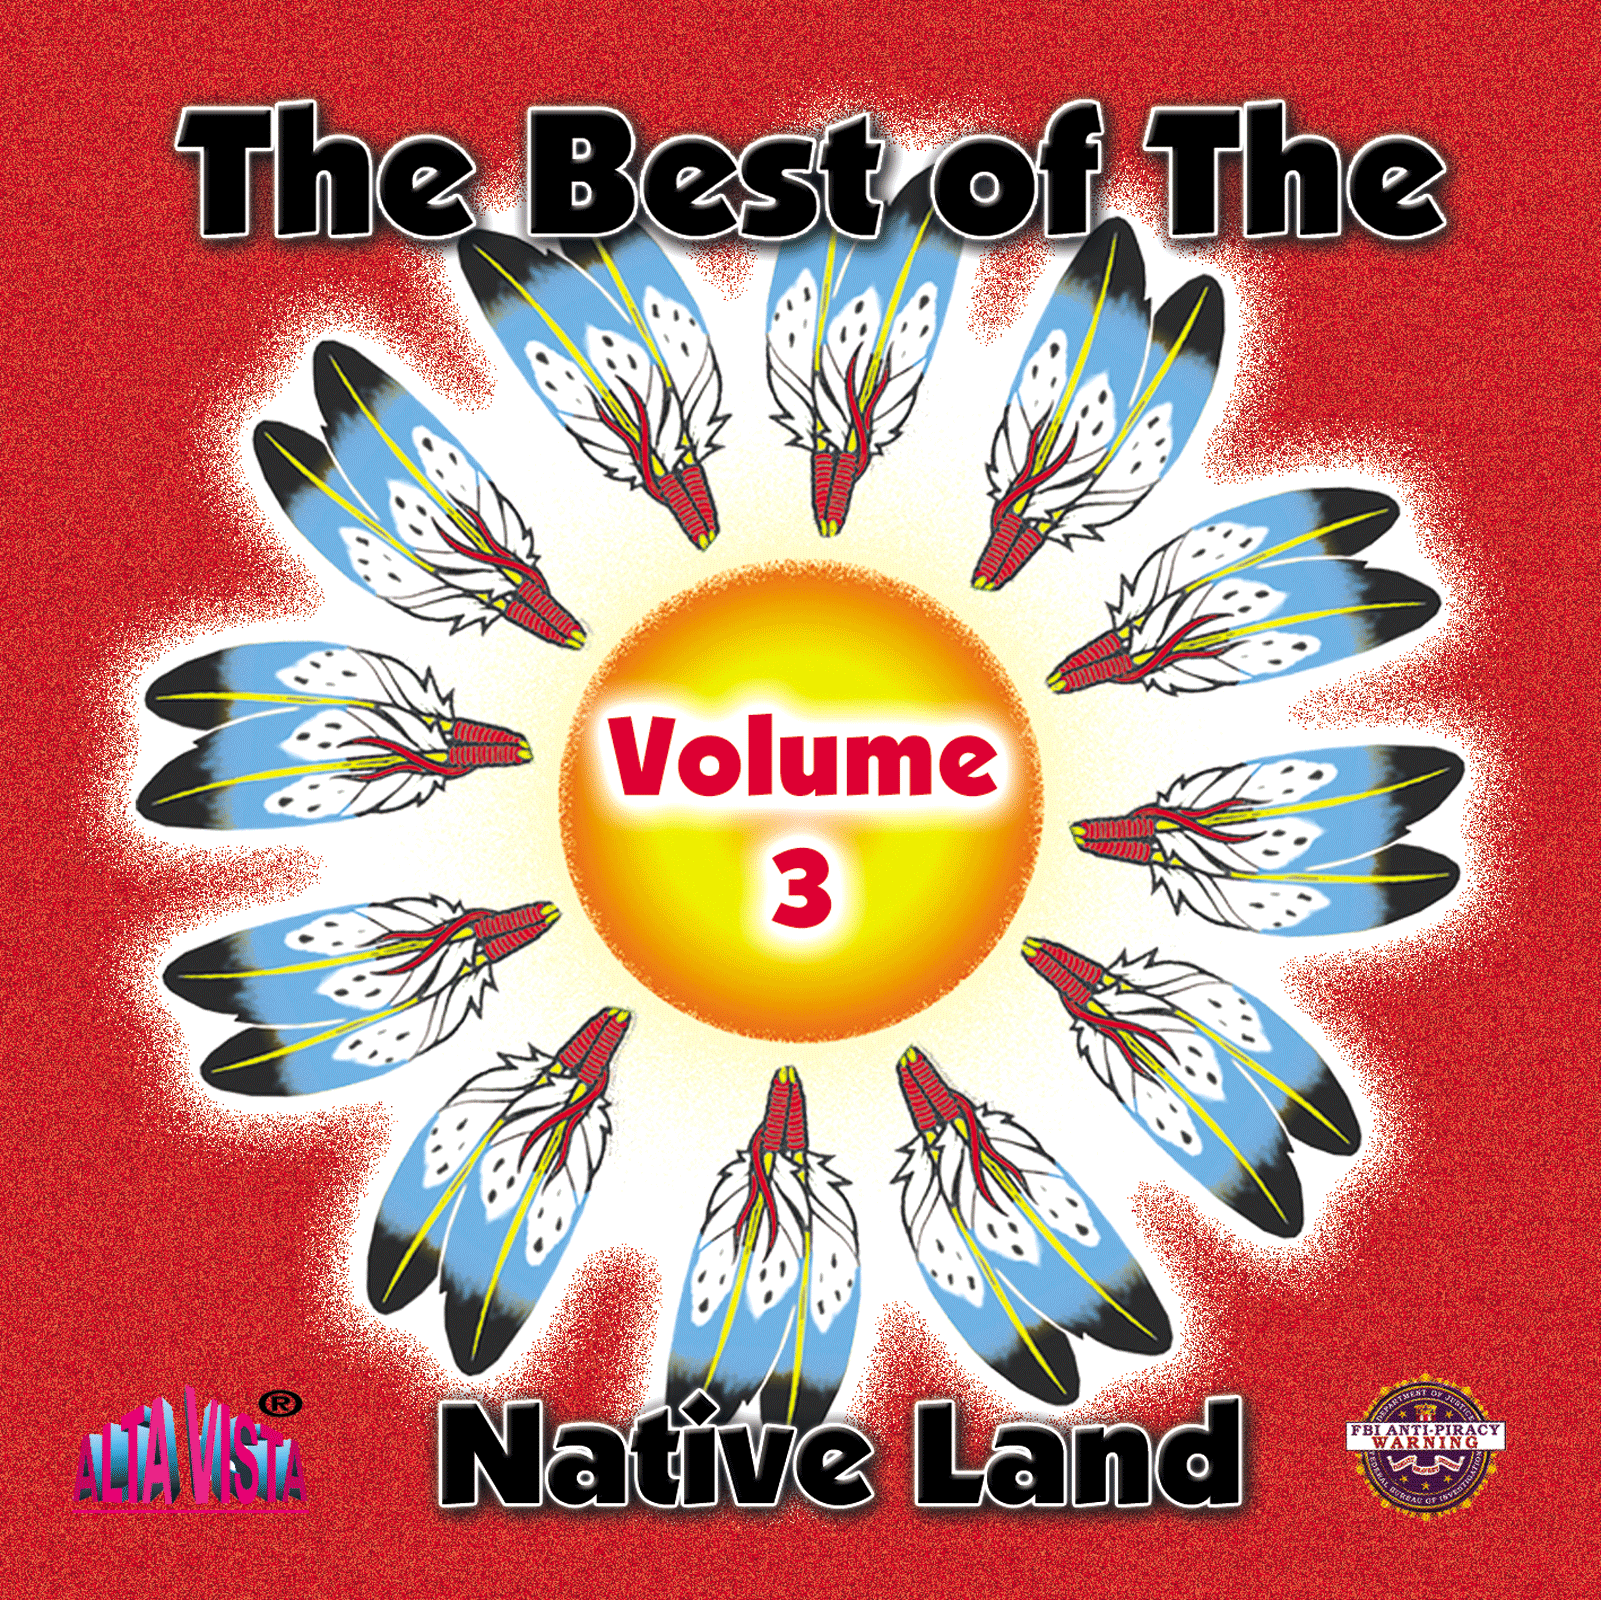 Best of the Native Land Vol 3 Downloadable songs